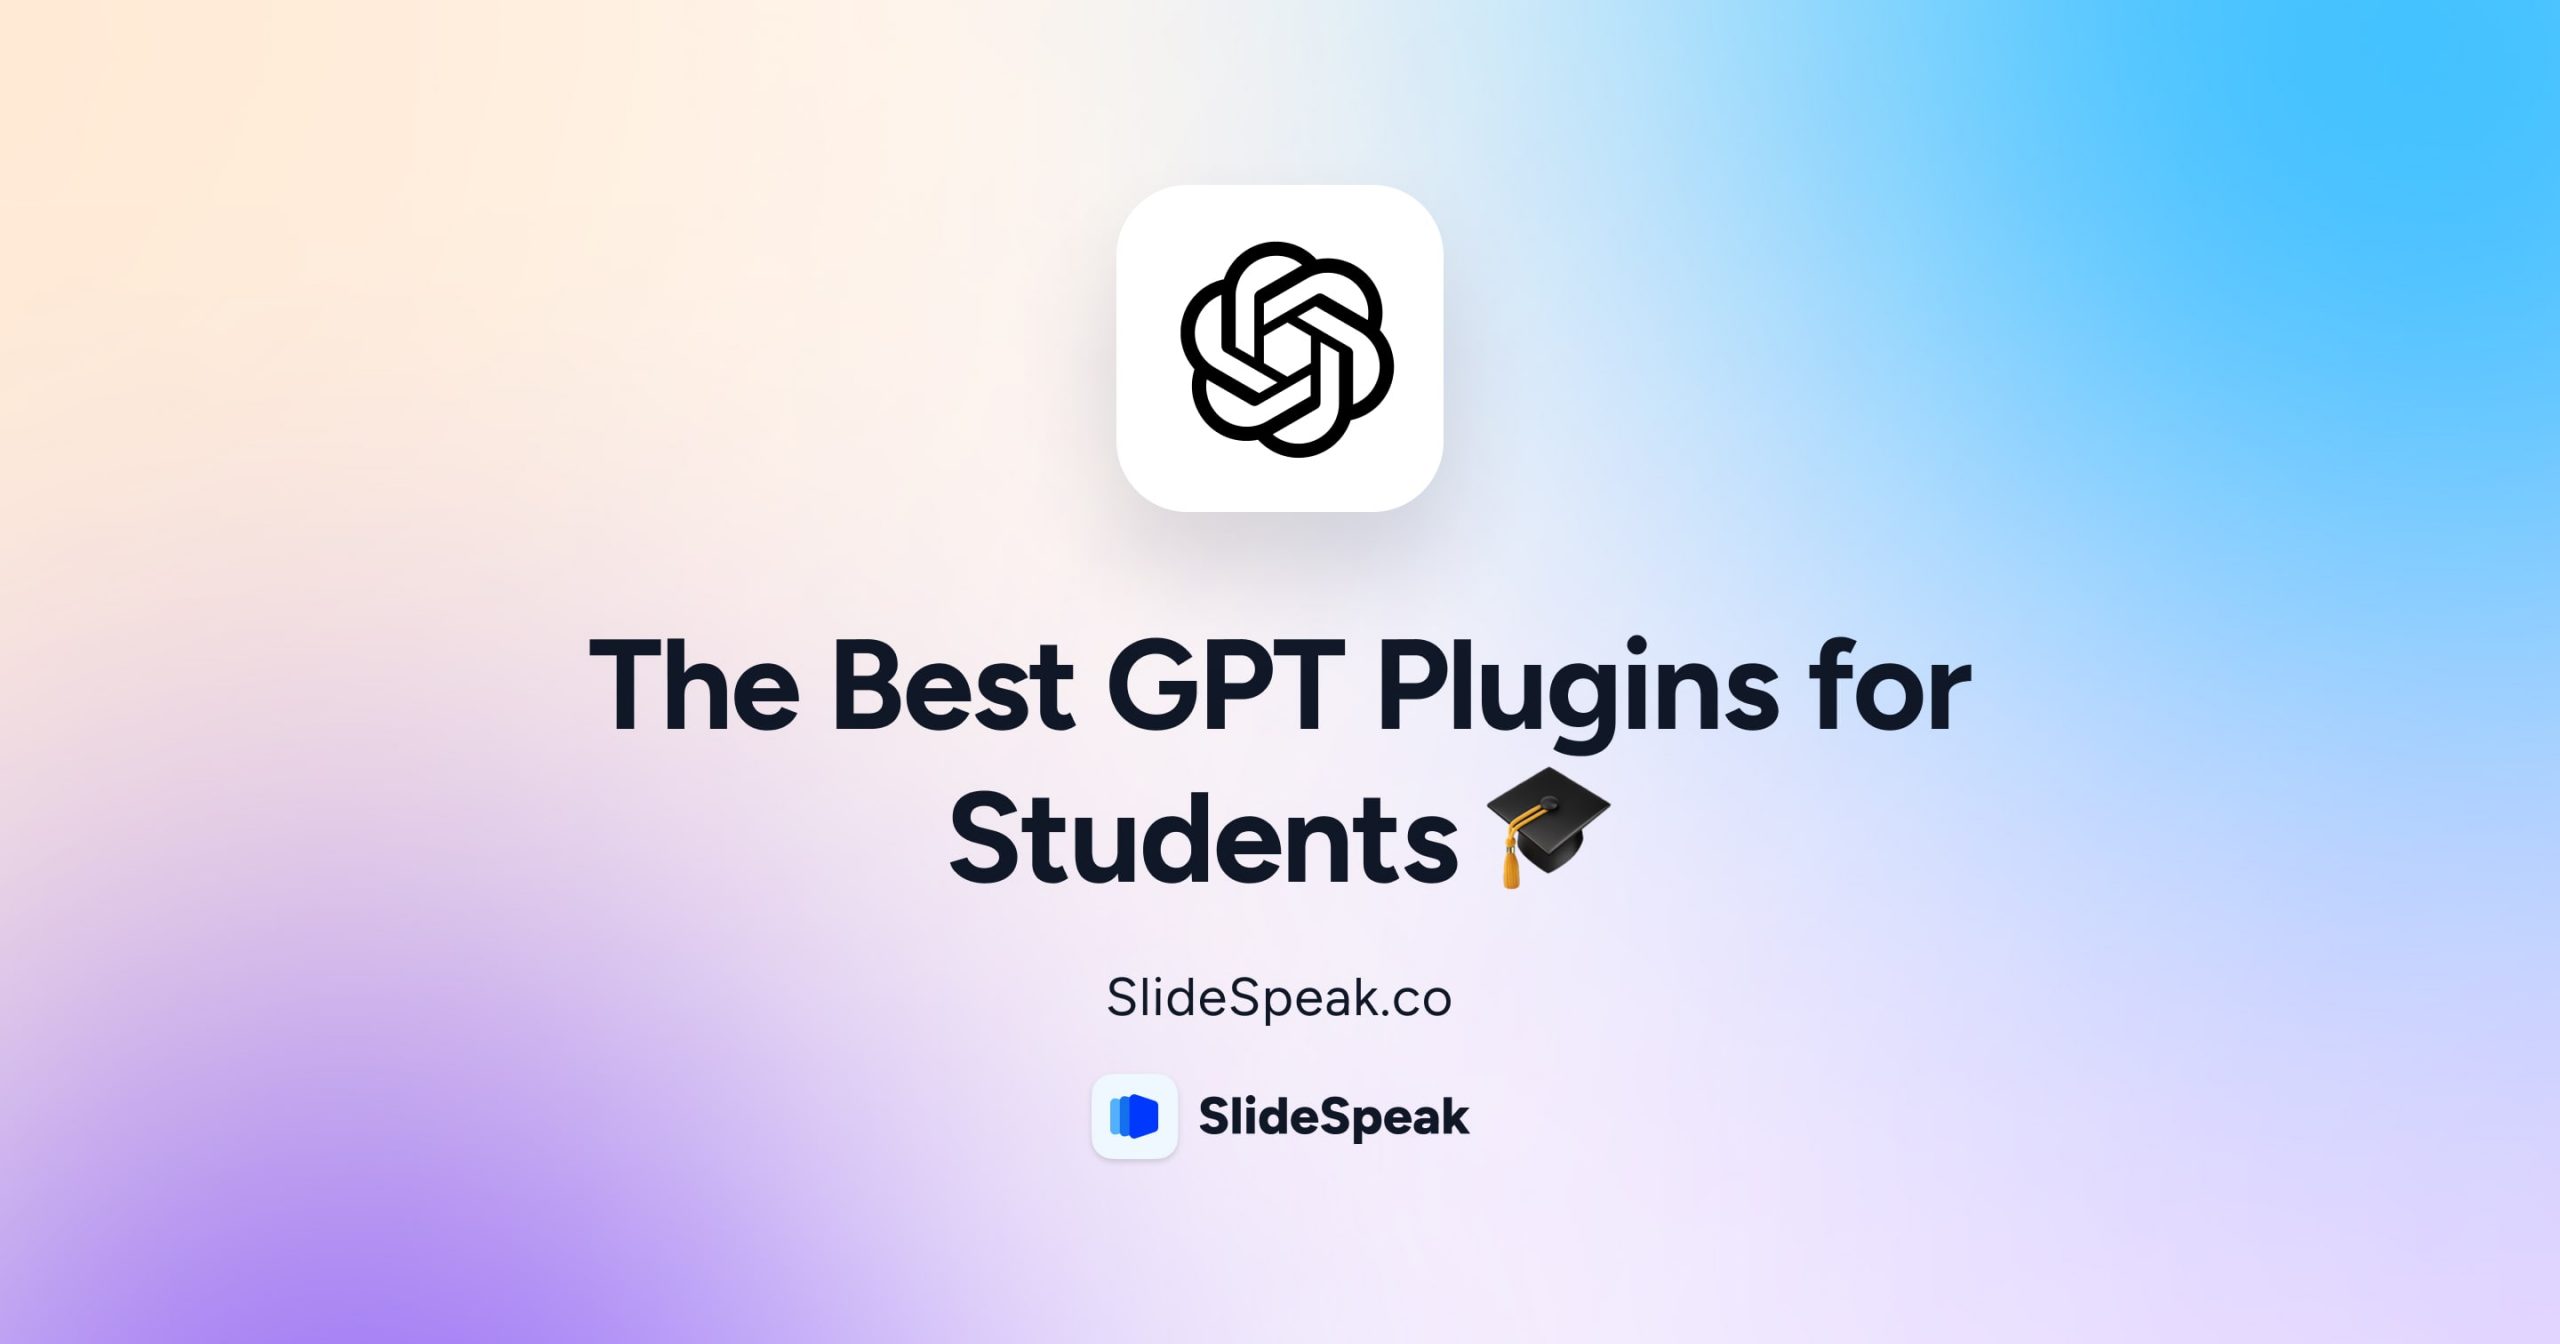 The best ChatGPT Plugins for Students